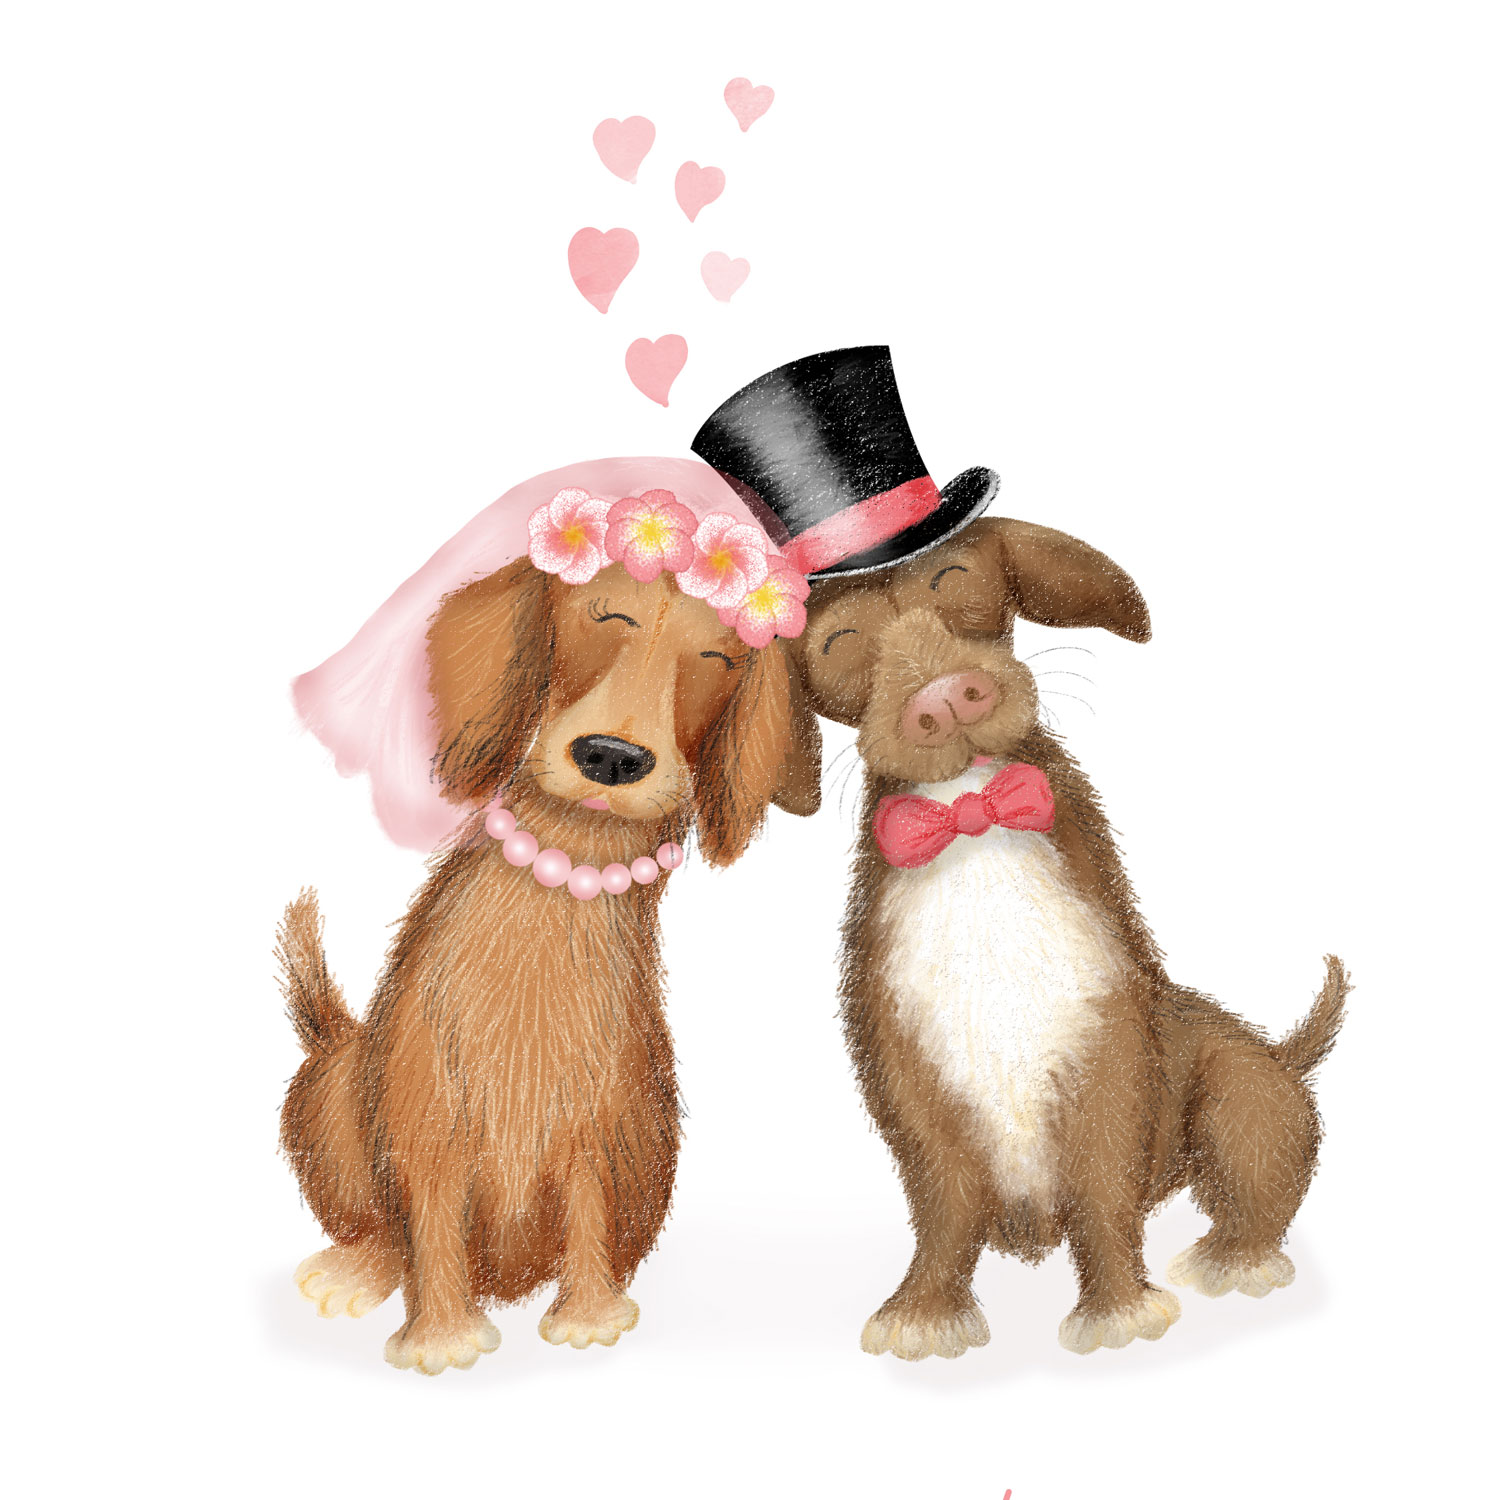 Drawing of two happy dachshunds wearing bride and groom outfits with hearts above them